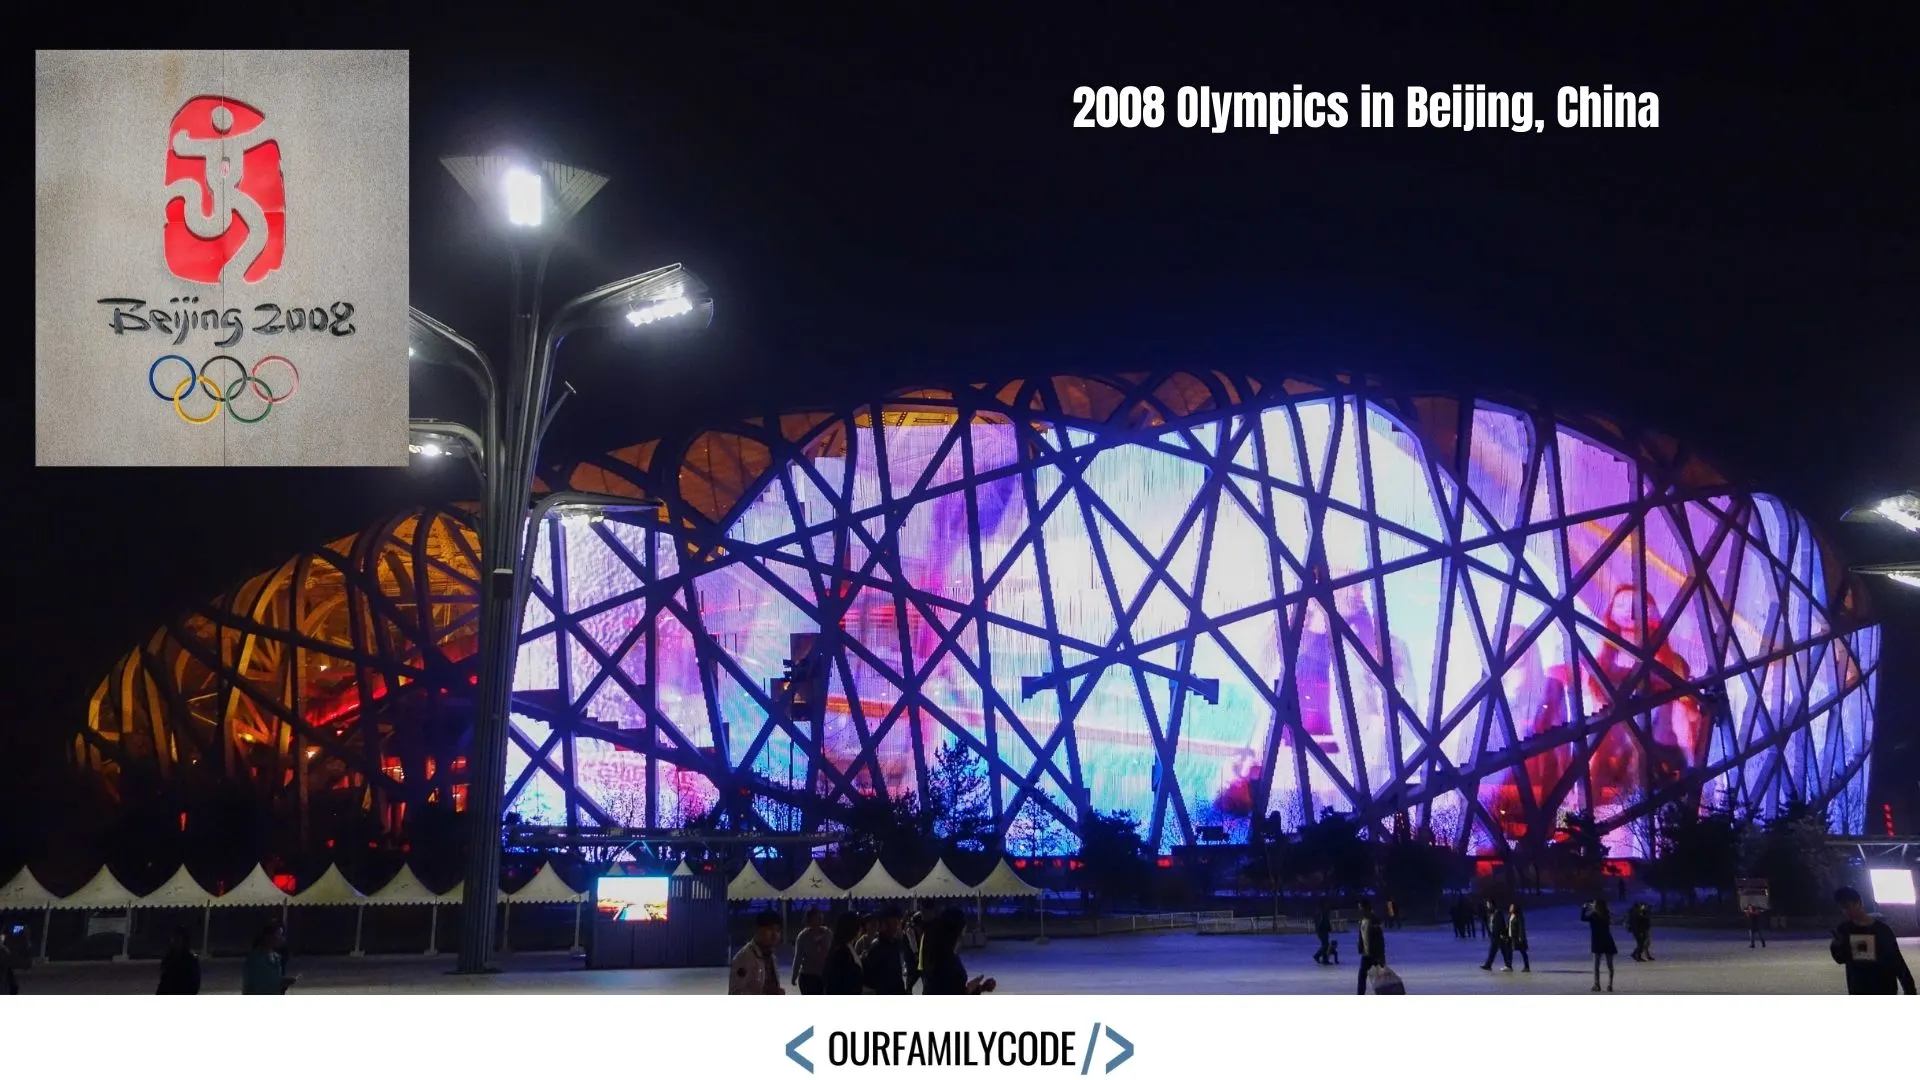 A picture of the Nest Olympic Stadium from the 2008 Beijing, China.